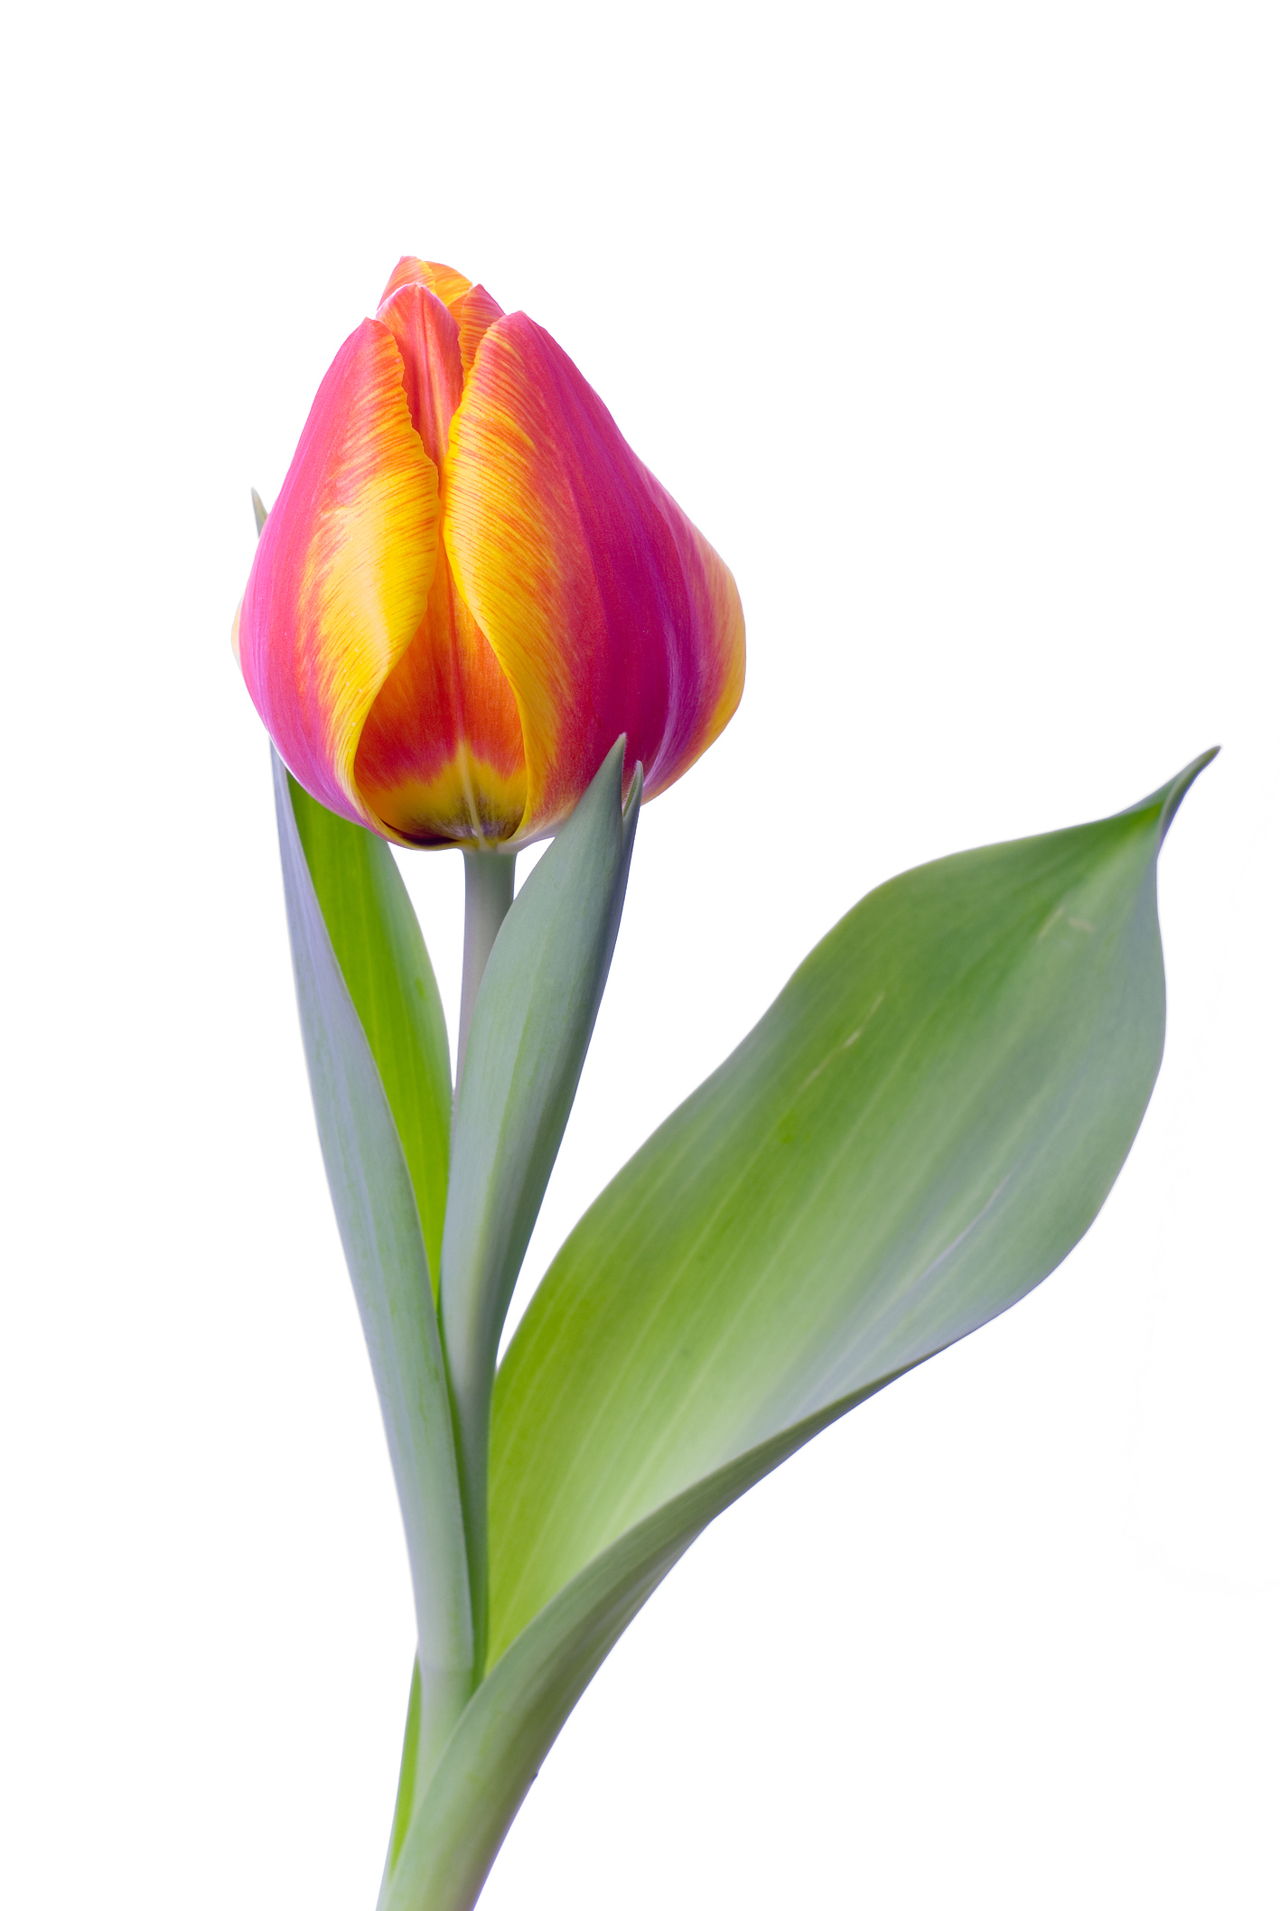 Everything You Ever Needed to Know About Dividing Tulip Bulbs